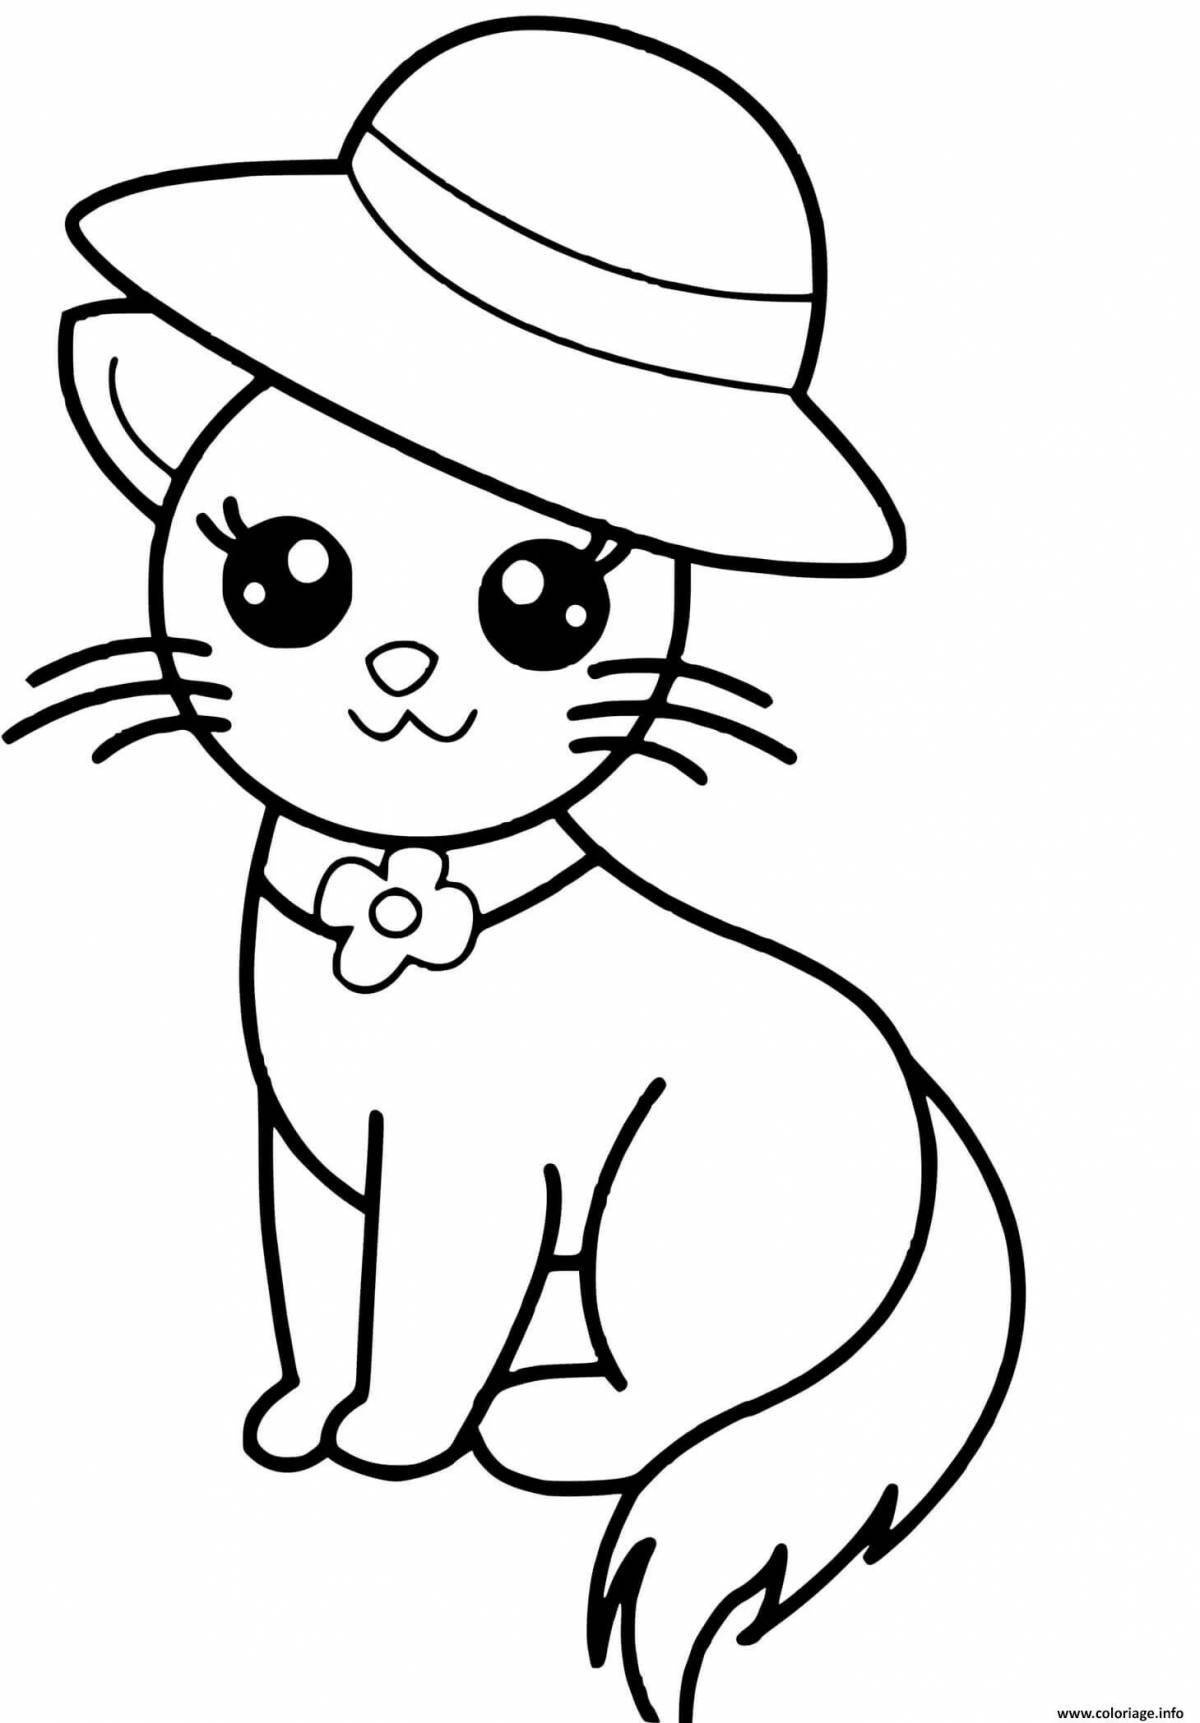 Colourful cat coloring book